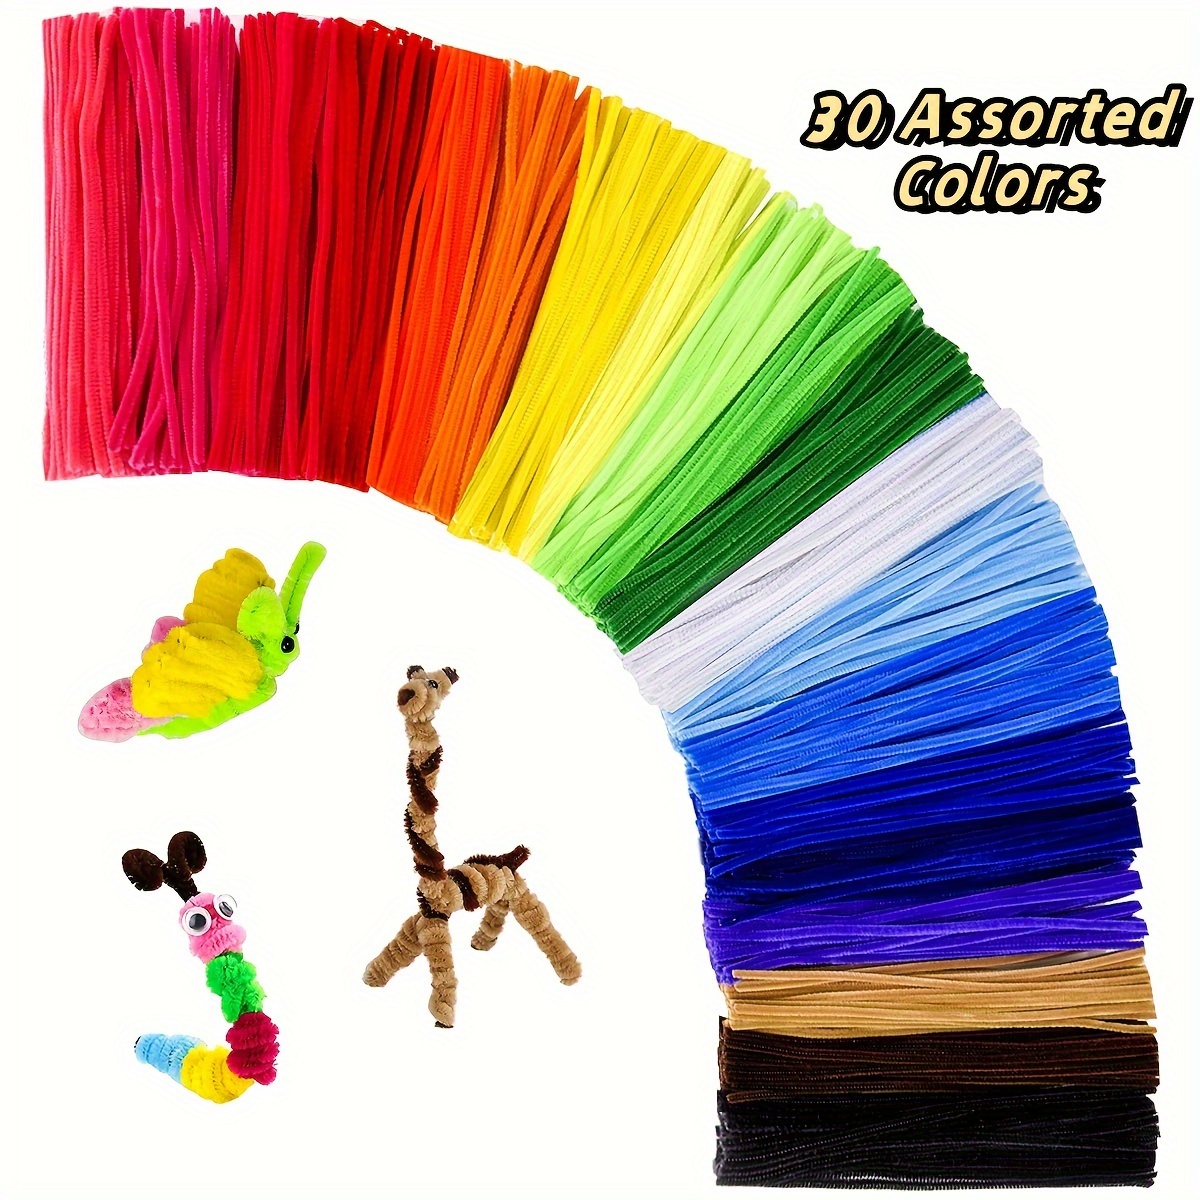 2 Pieces Pipe Cleaners Craft Supplies Multi-Color Chenille Stems for Art  and Craft Project Creative DIY Decorations - AliExpress